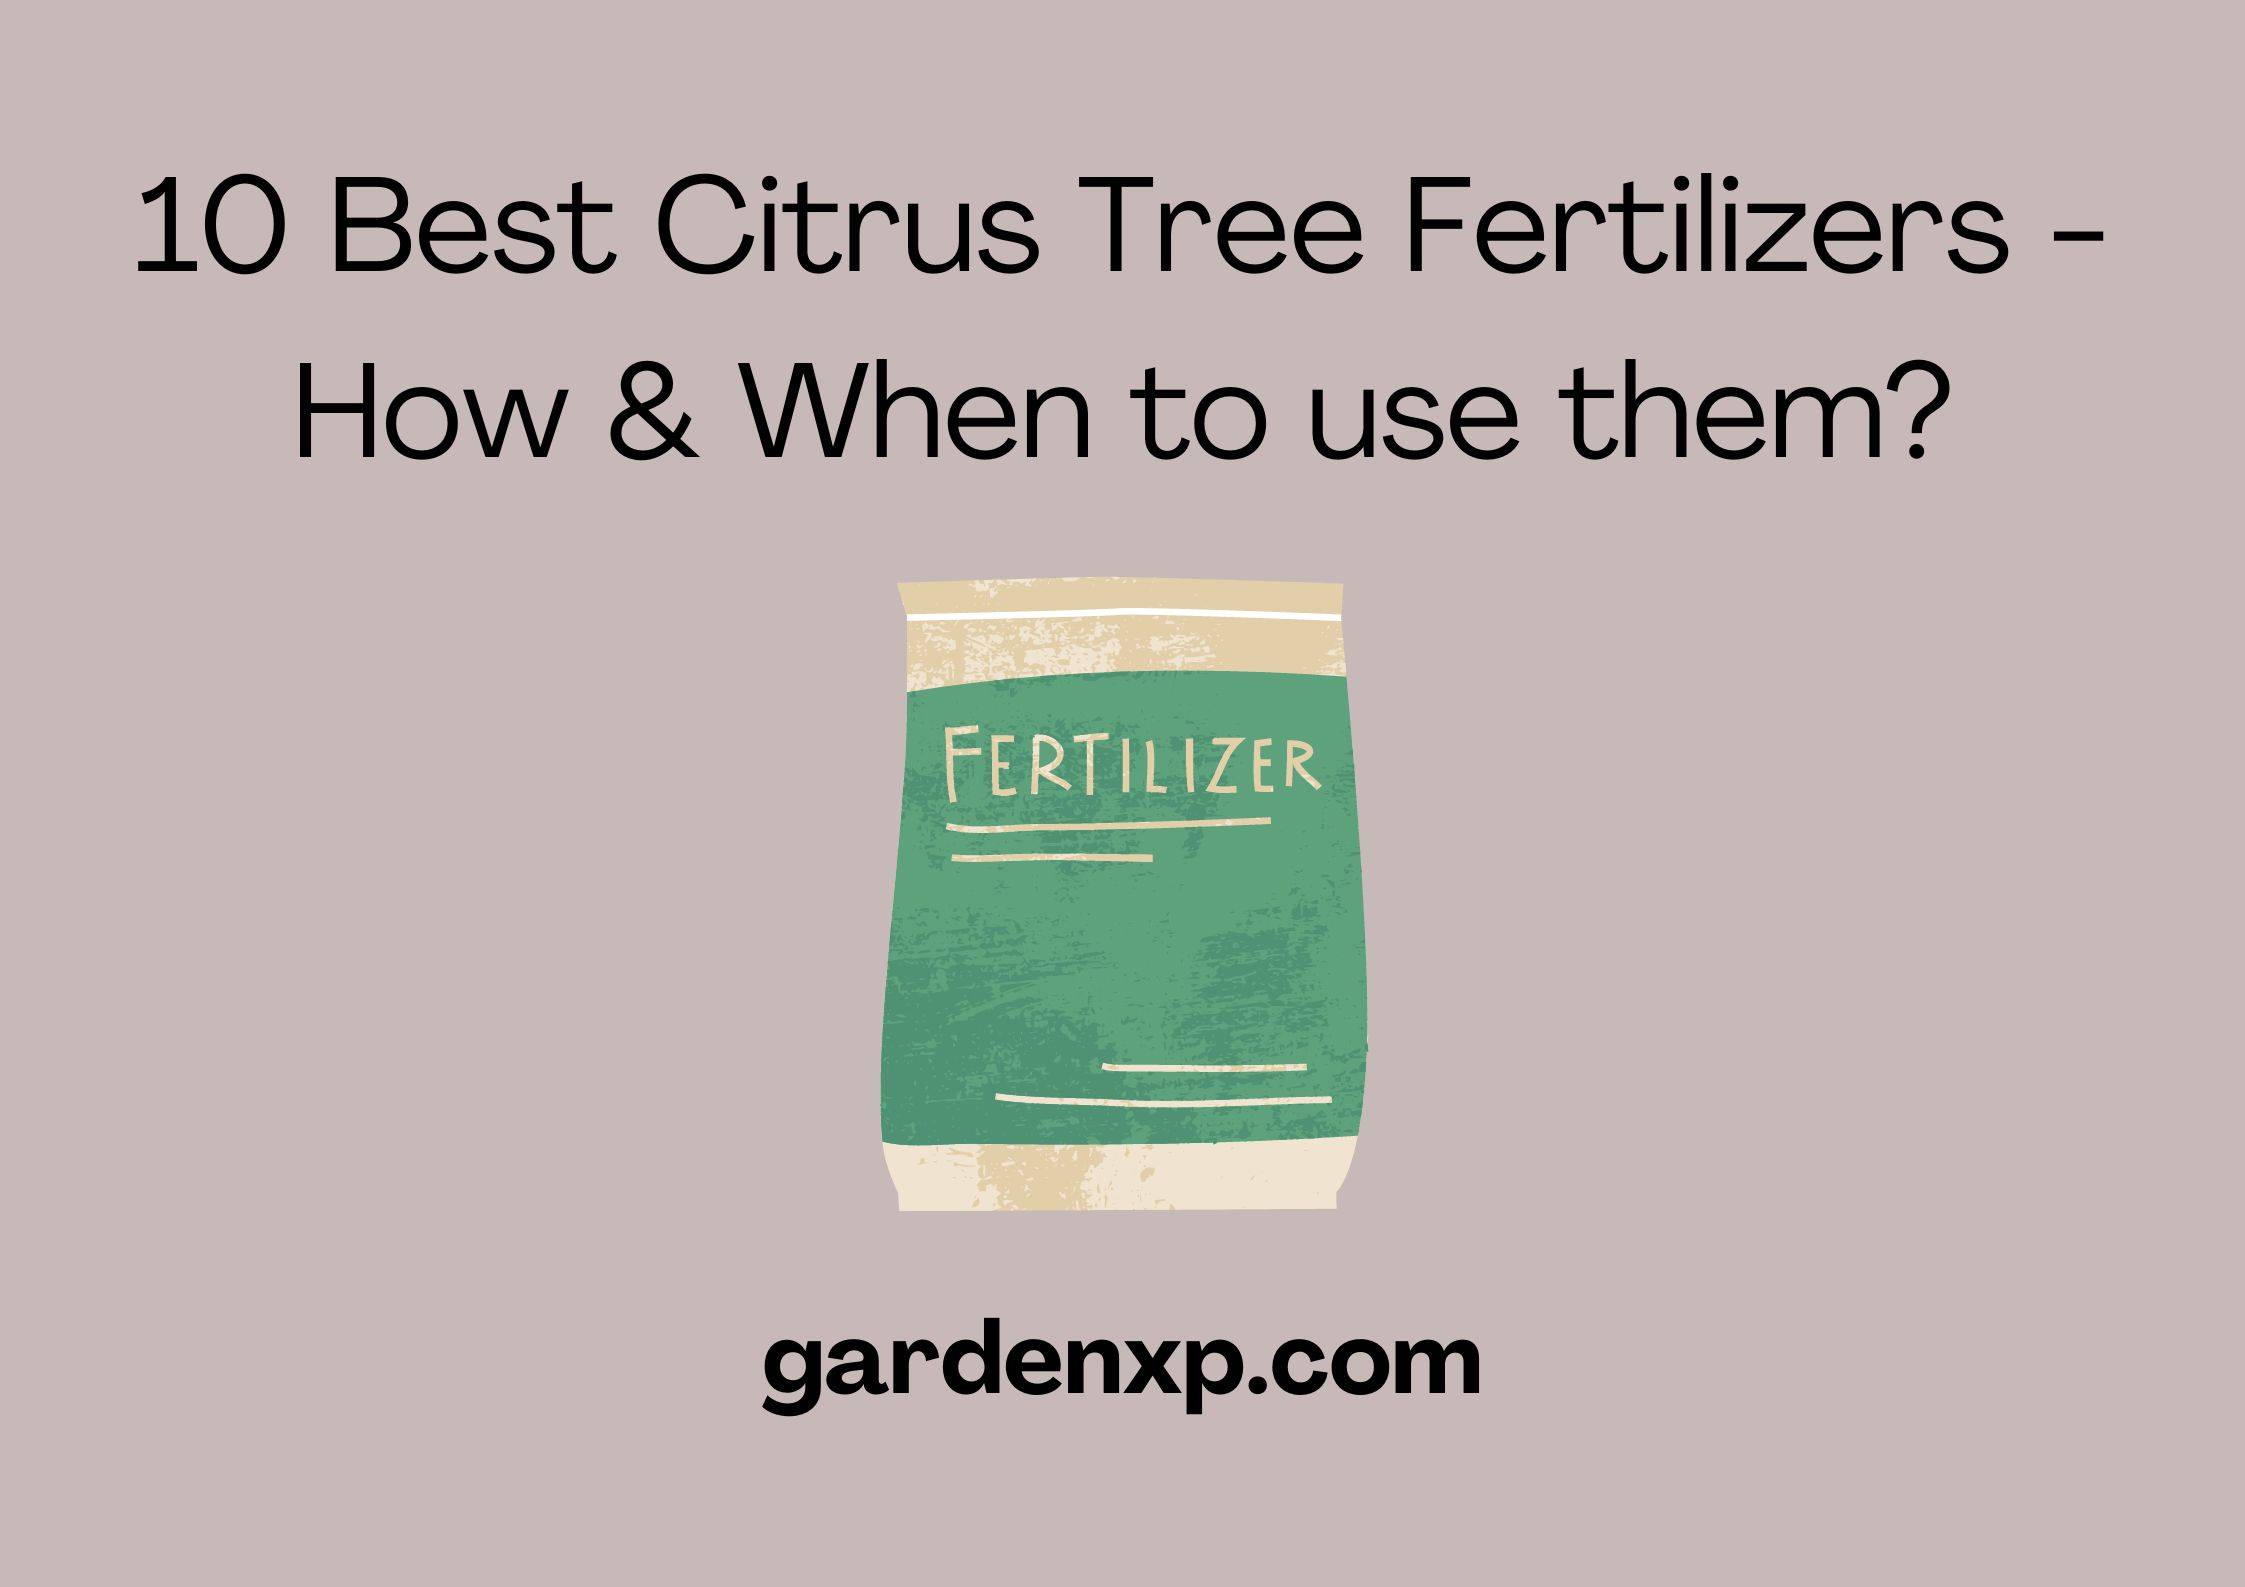 10 Best Citrus Tree Fertilizers - How & When to use them?